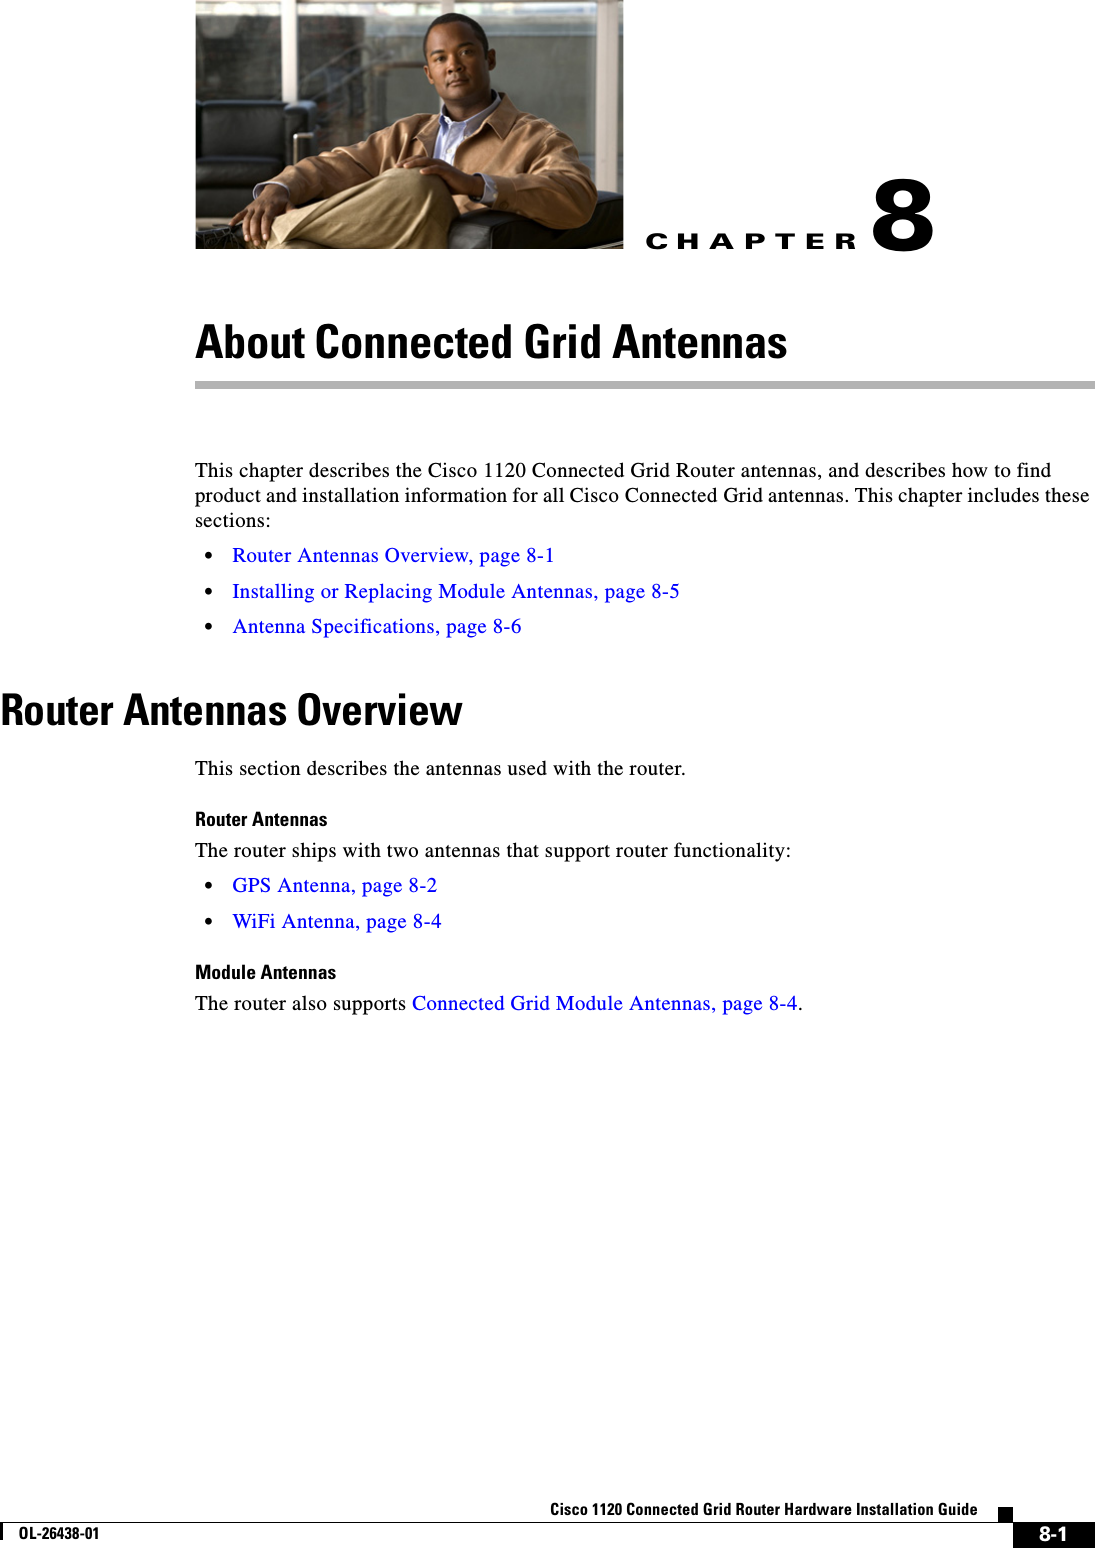 CHAPTER 8-1Cisco 1120 Connected Grid Router Hardware Installation GuideOL-26438-018About Connected Grid AntennasThis chapter describes the Cisco 1120 Connected Grid Router antennas, and describes how to find product and installation information for all Cisco Connected Grid antennas. This chapter includes these sections:•Router Antennas Overview, page 8-1•Installing or Replacing Module Antennas, page 8-5•Antenna Specifications, page 8-6Router Antennas Overview This section describes the antennas used with the router. Router AntennasThe router ships with two antennas that support router functionality:•GPS Antenna, page 8-2•WiFi Antenna, page 8-4Module AntennasThe router also supports Connected Grid Module Antennas, page 8-4. 